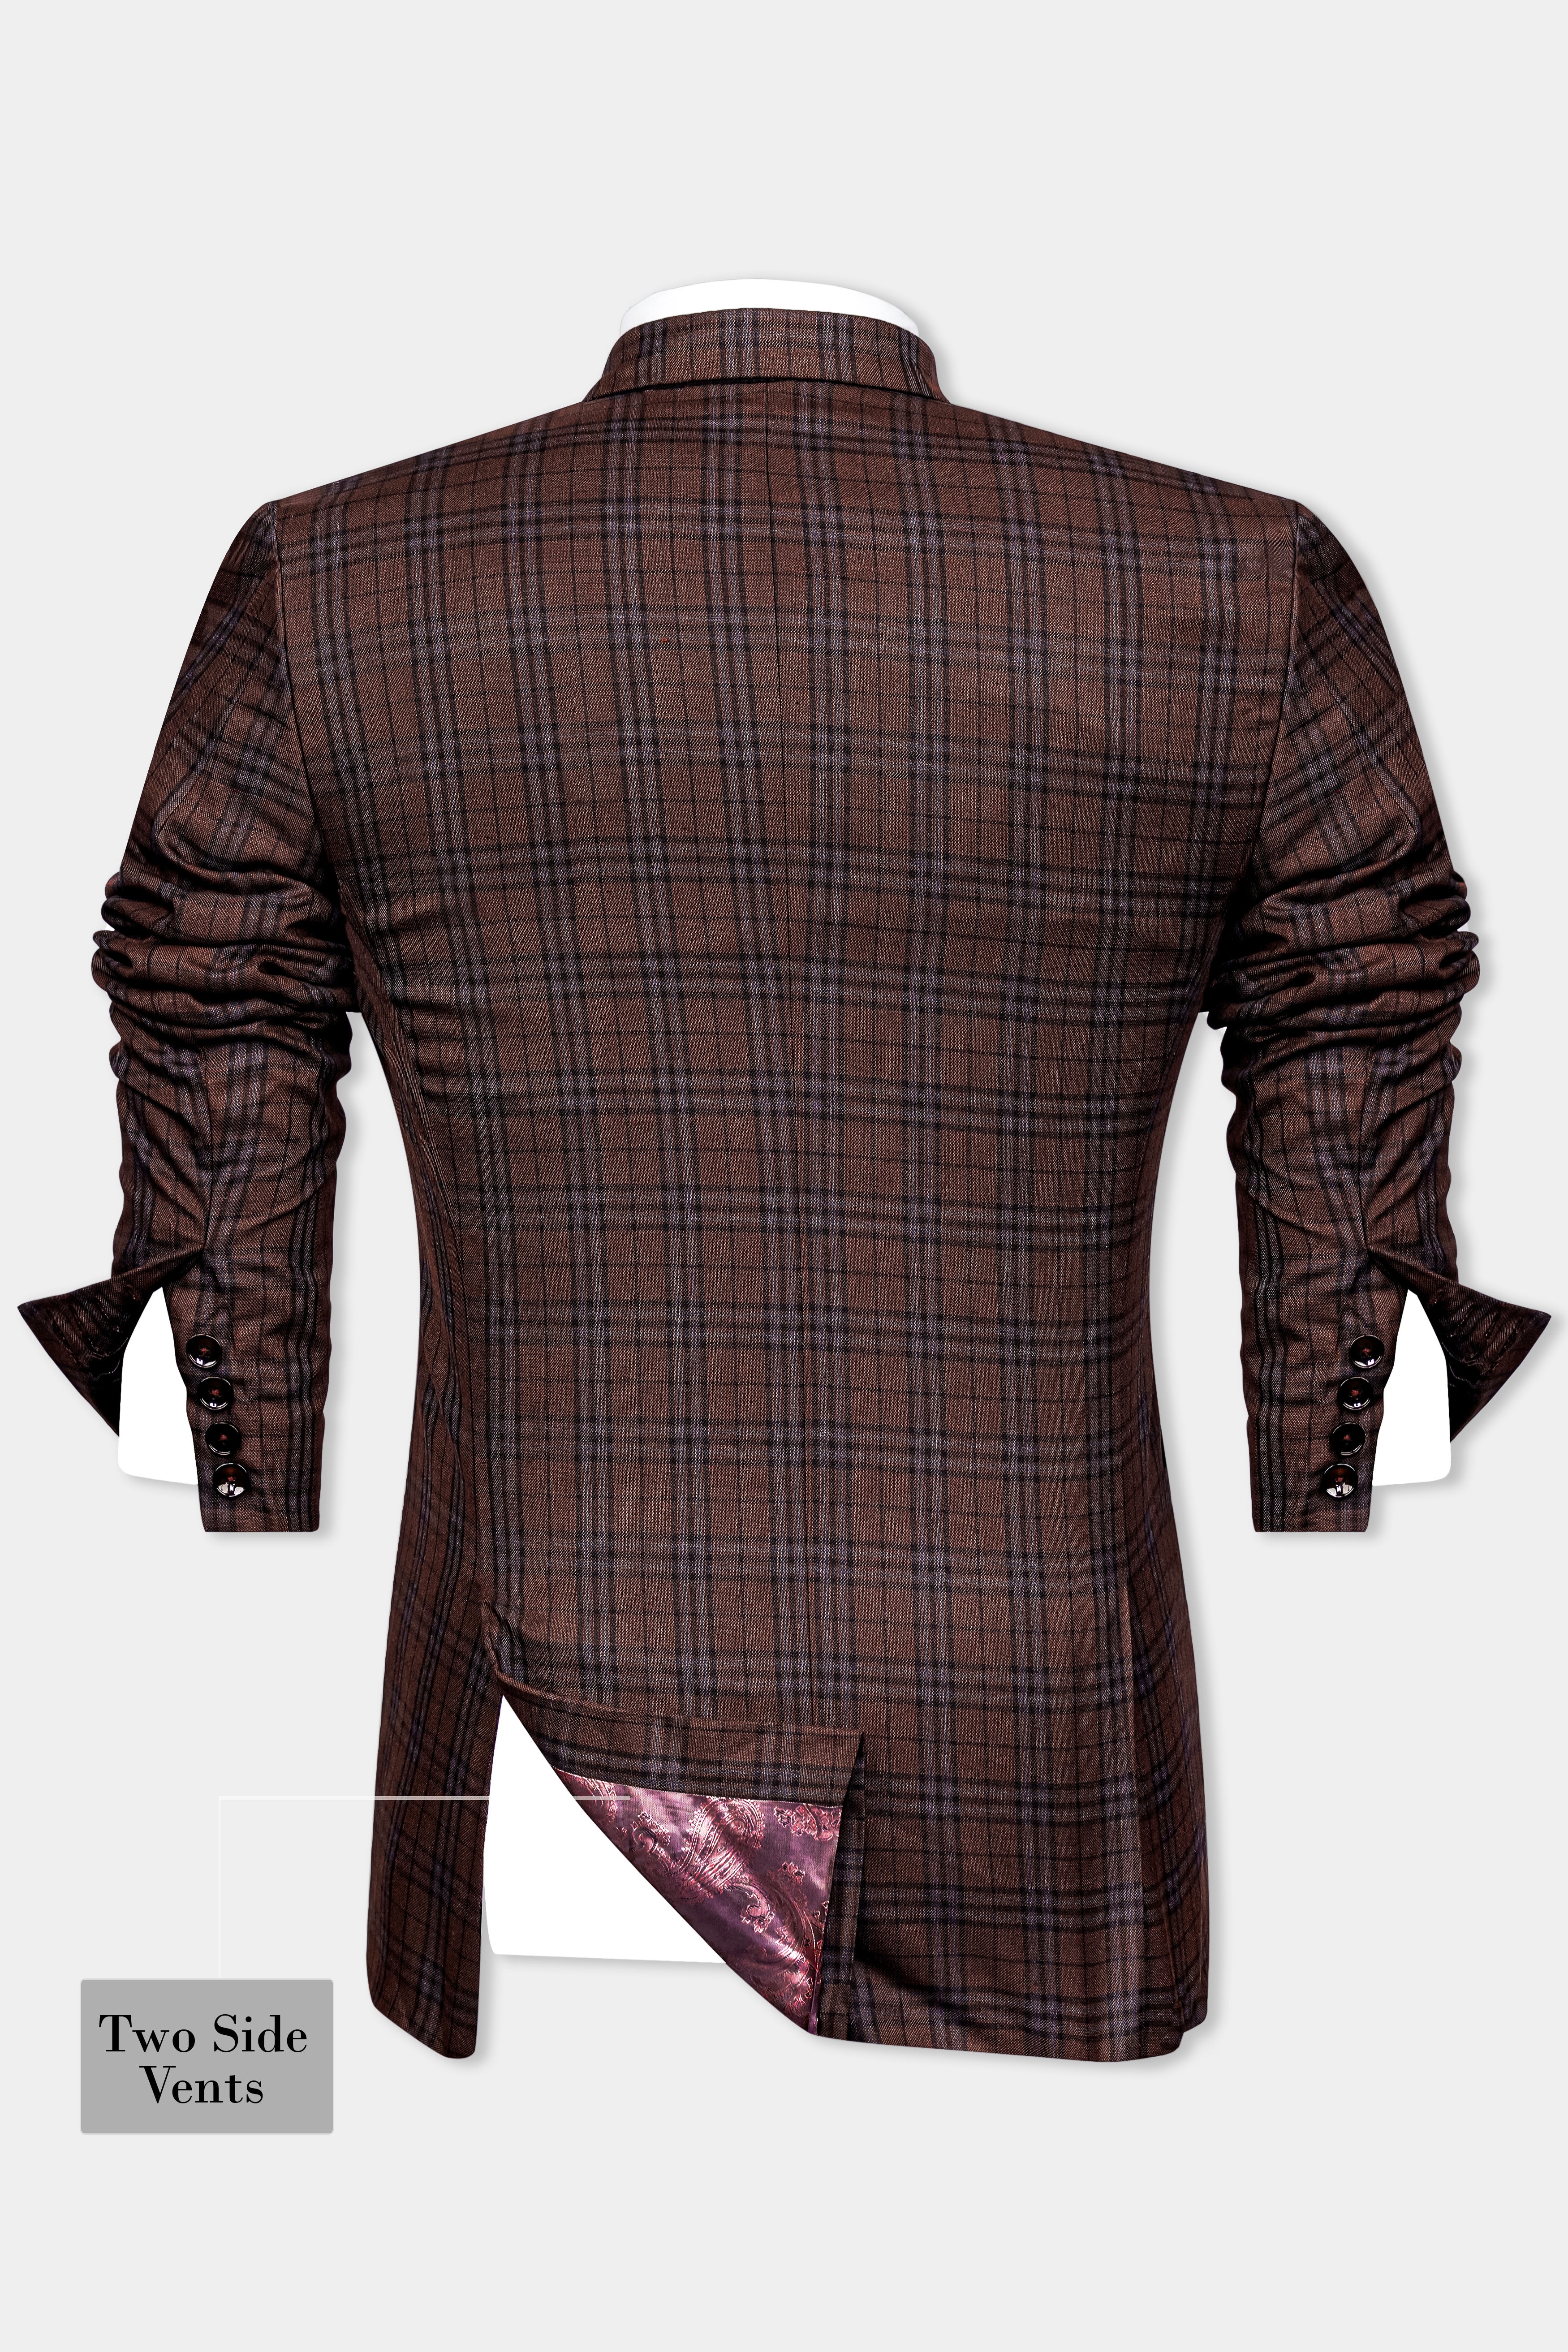 Gingerbread Plaid Wool blend Double-Brested Suit